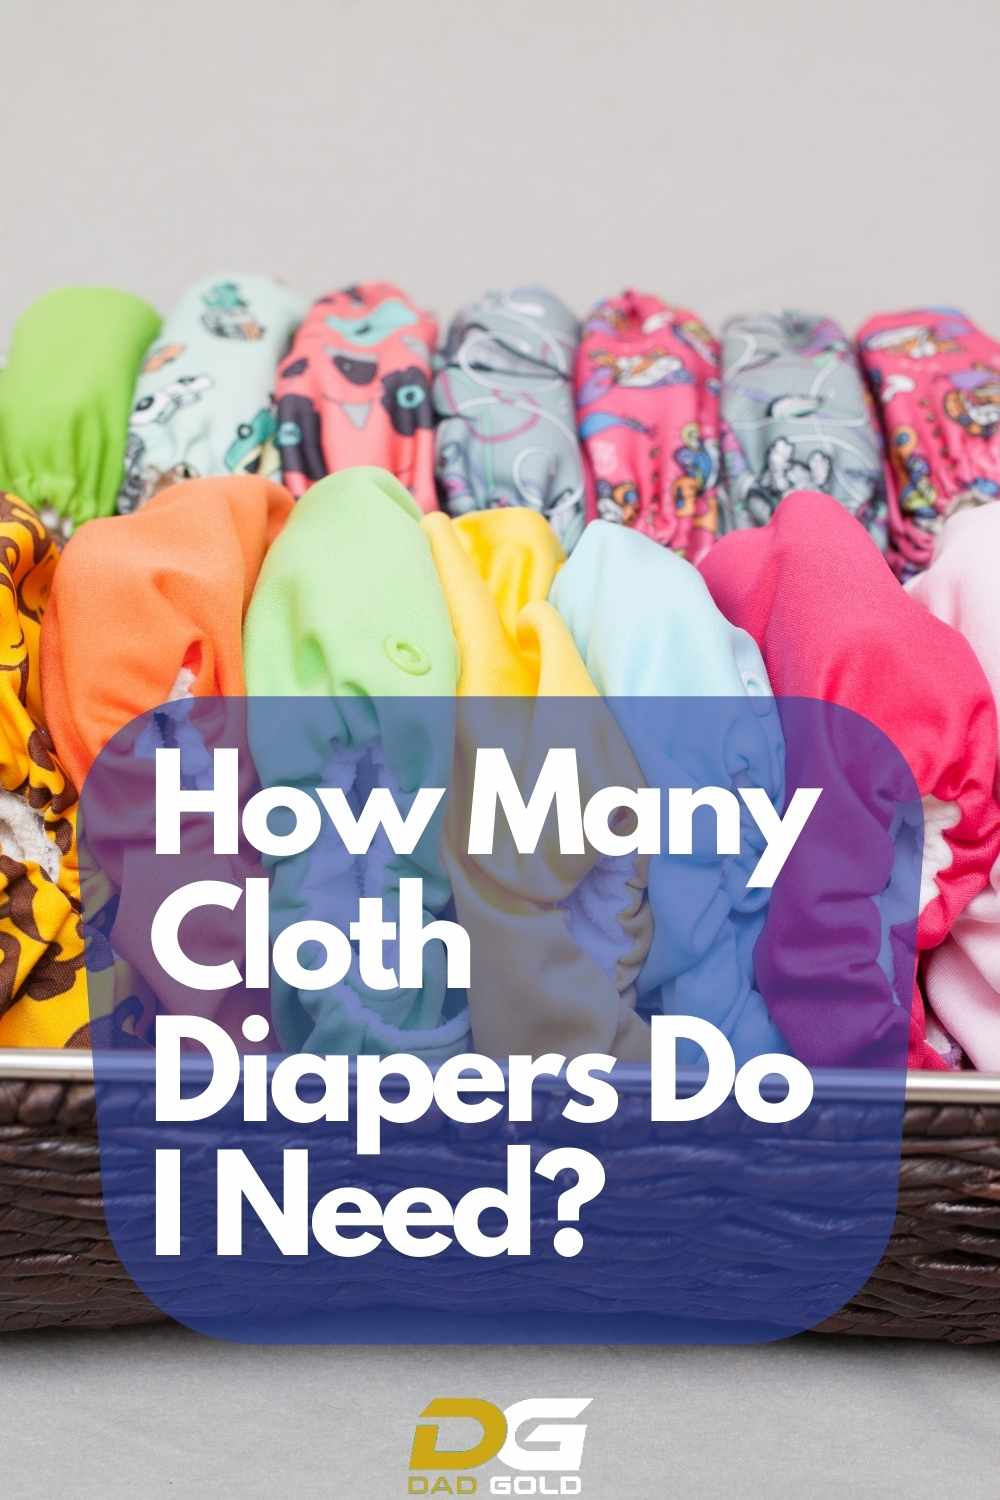 How Many Cloth Diapers Do I Need dadgold baby tips